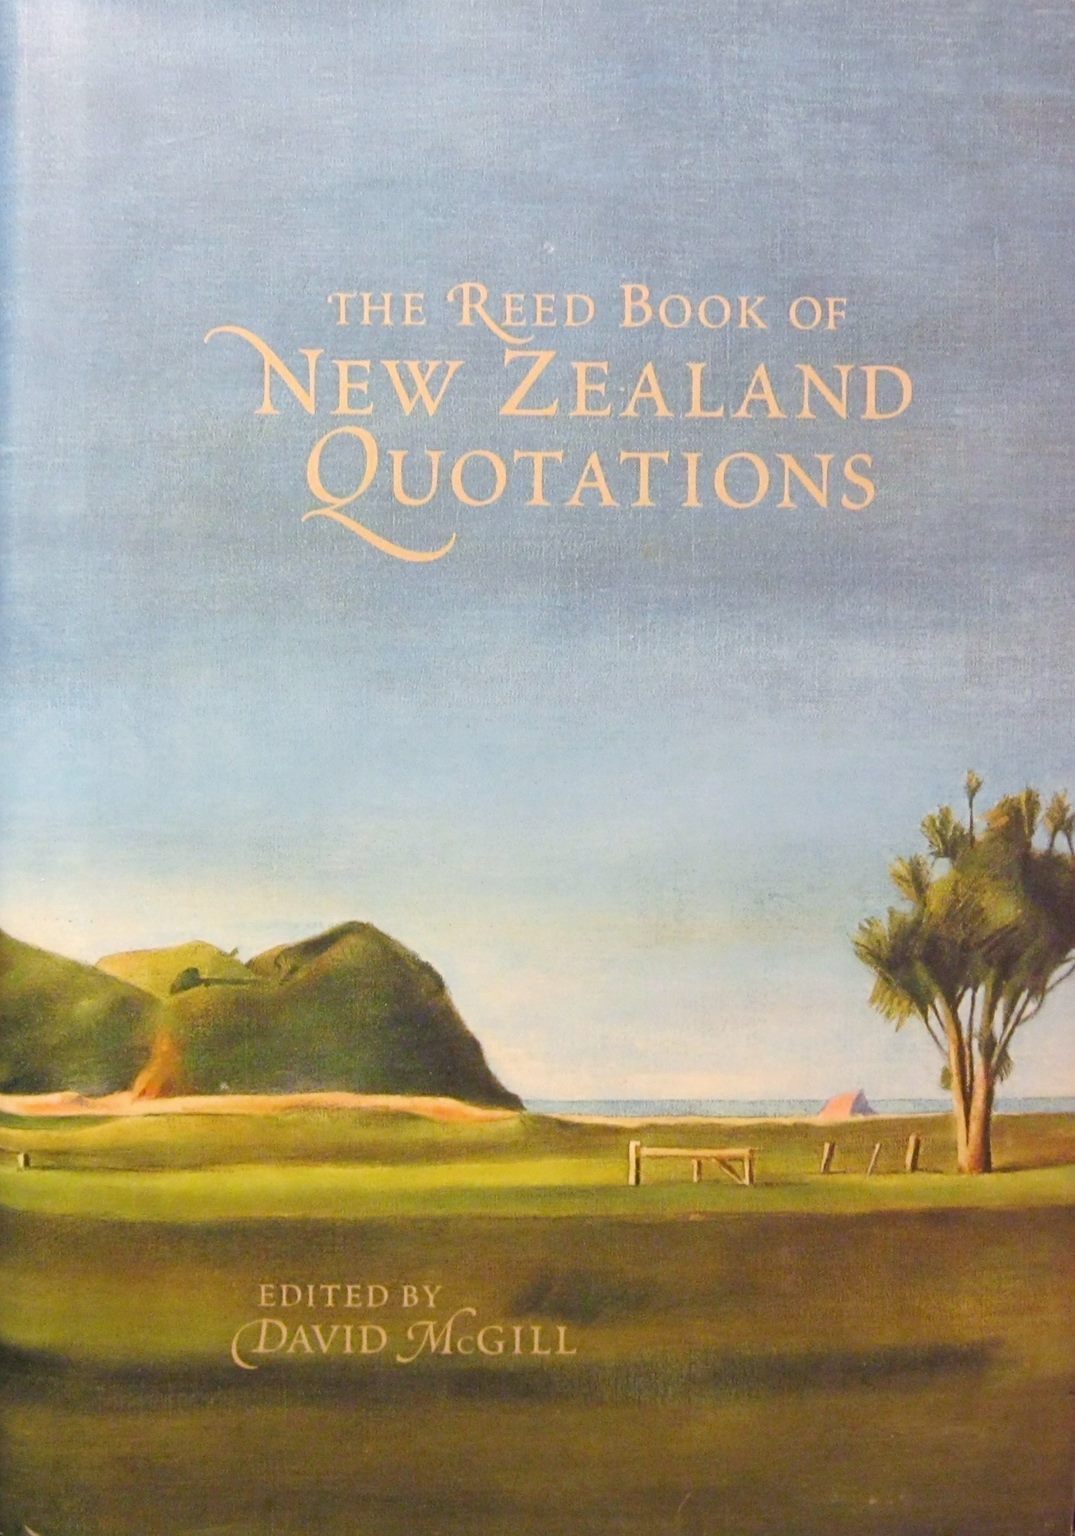 THE REED BOOK OF NEW ZEALAND QUOTATIONS